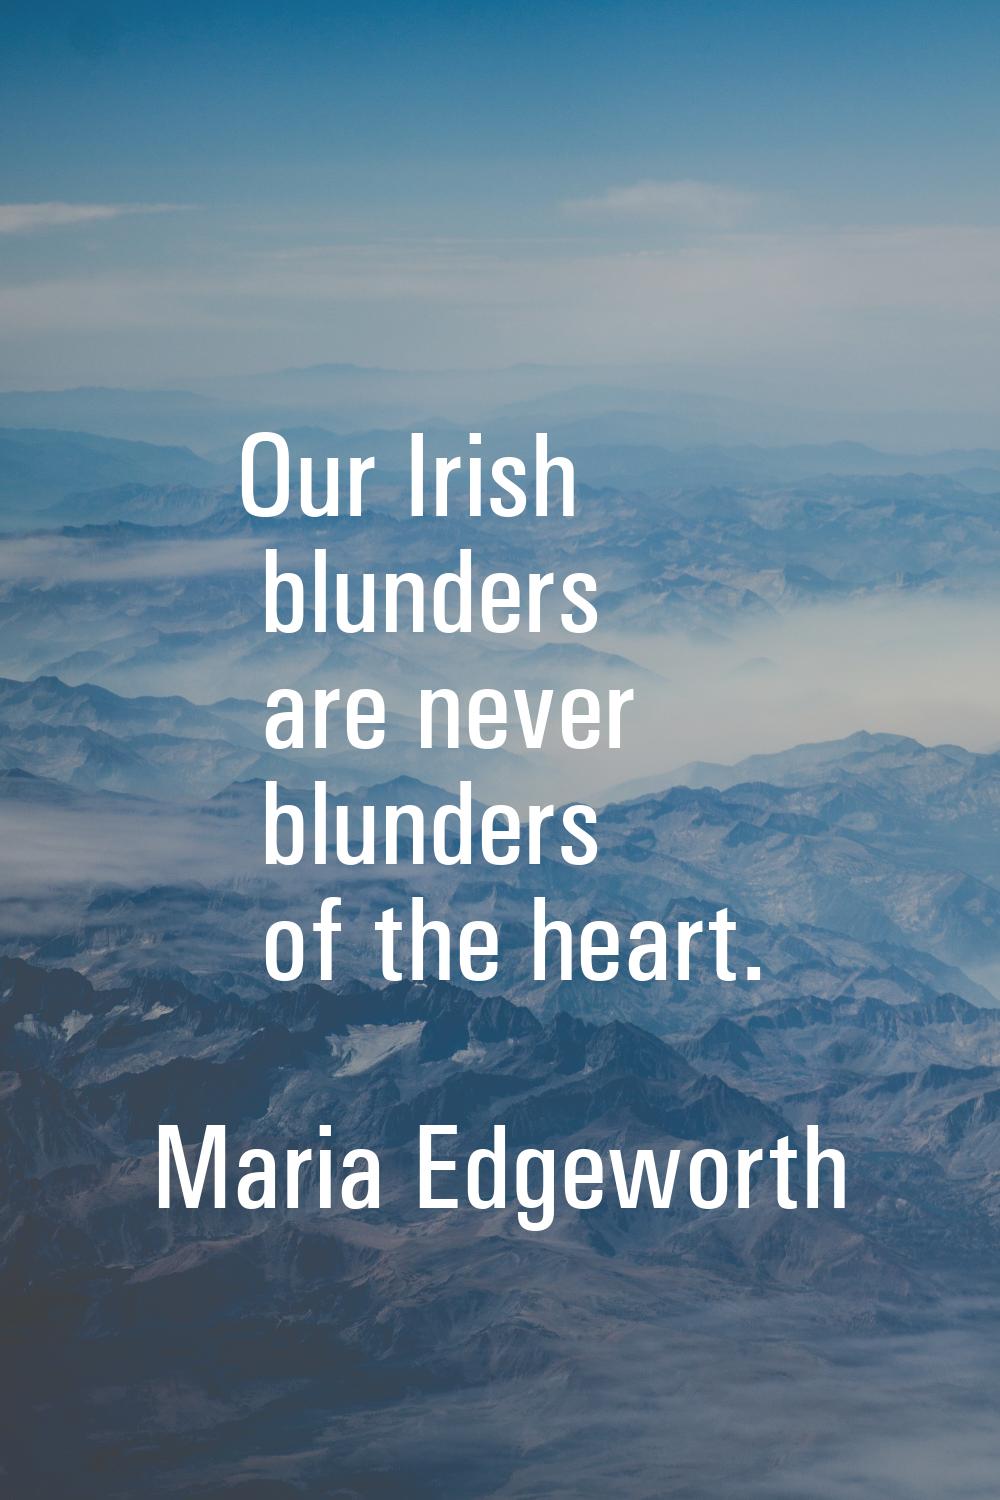 Our Irish blunders are never blunders of the heart.